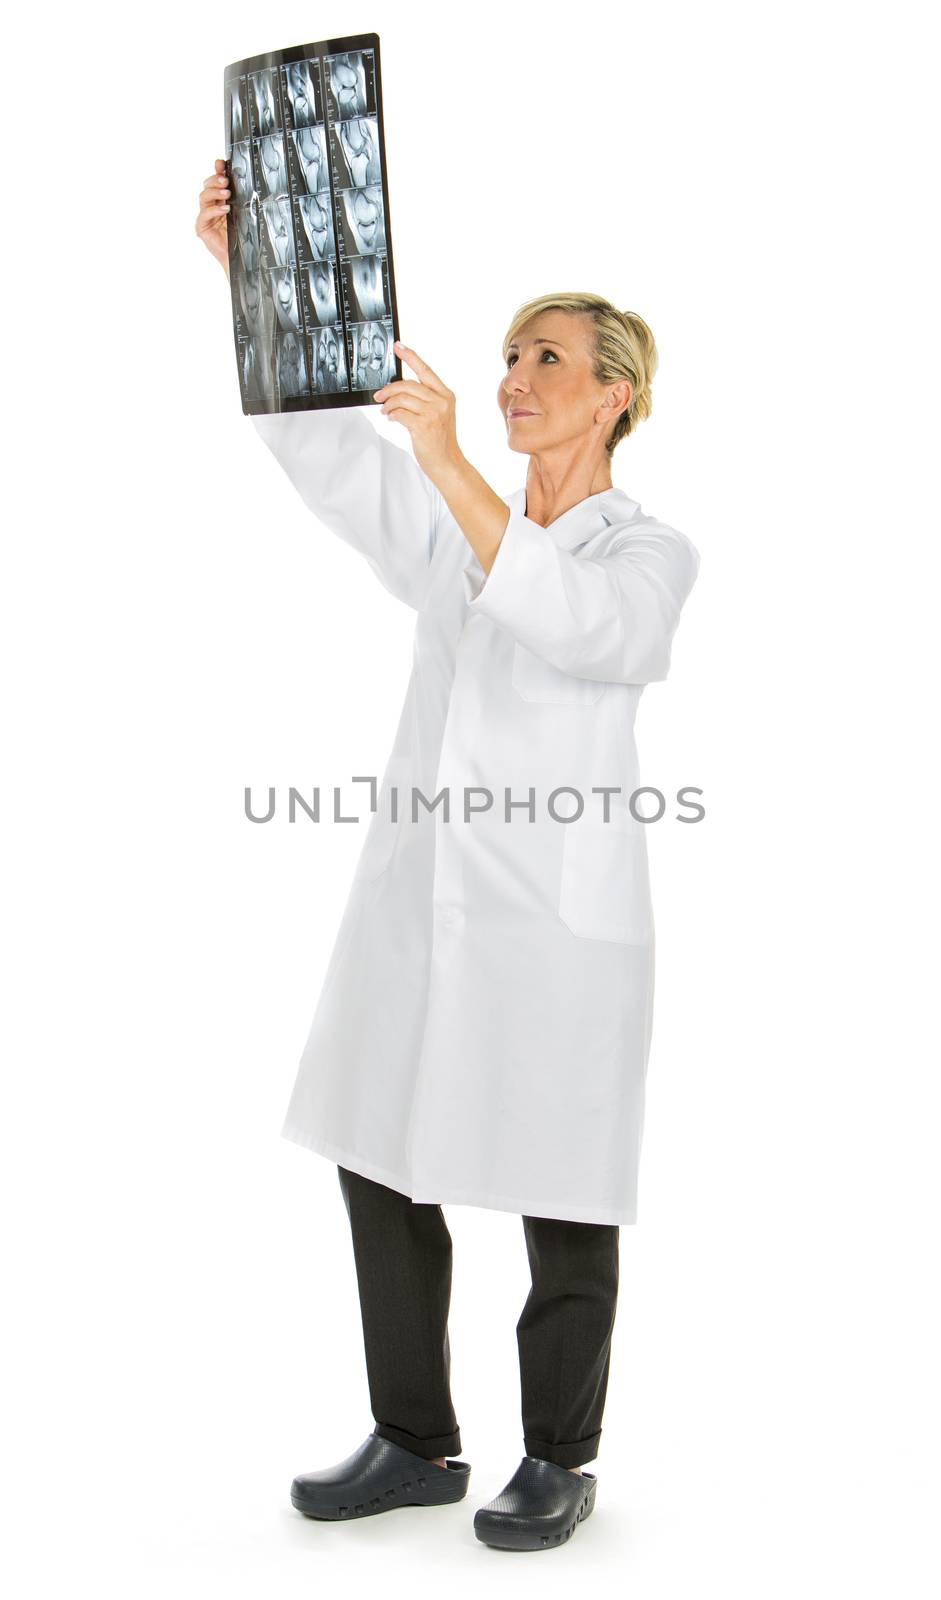 doctor woman looking at patient x-rays by Flareimage